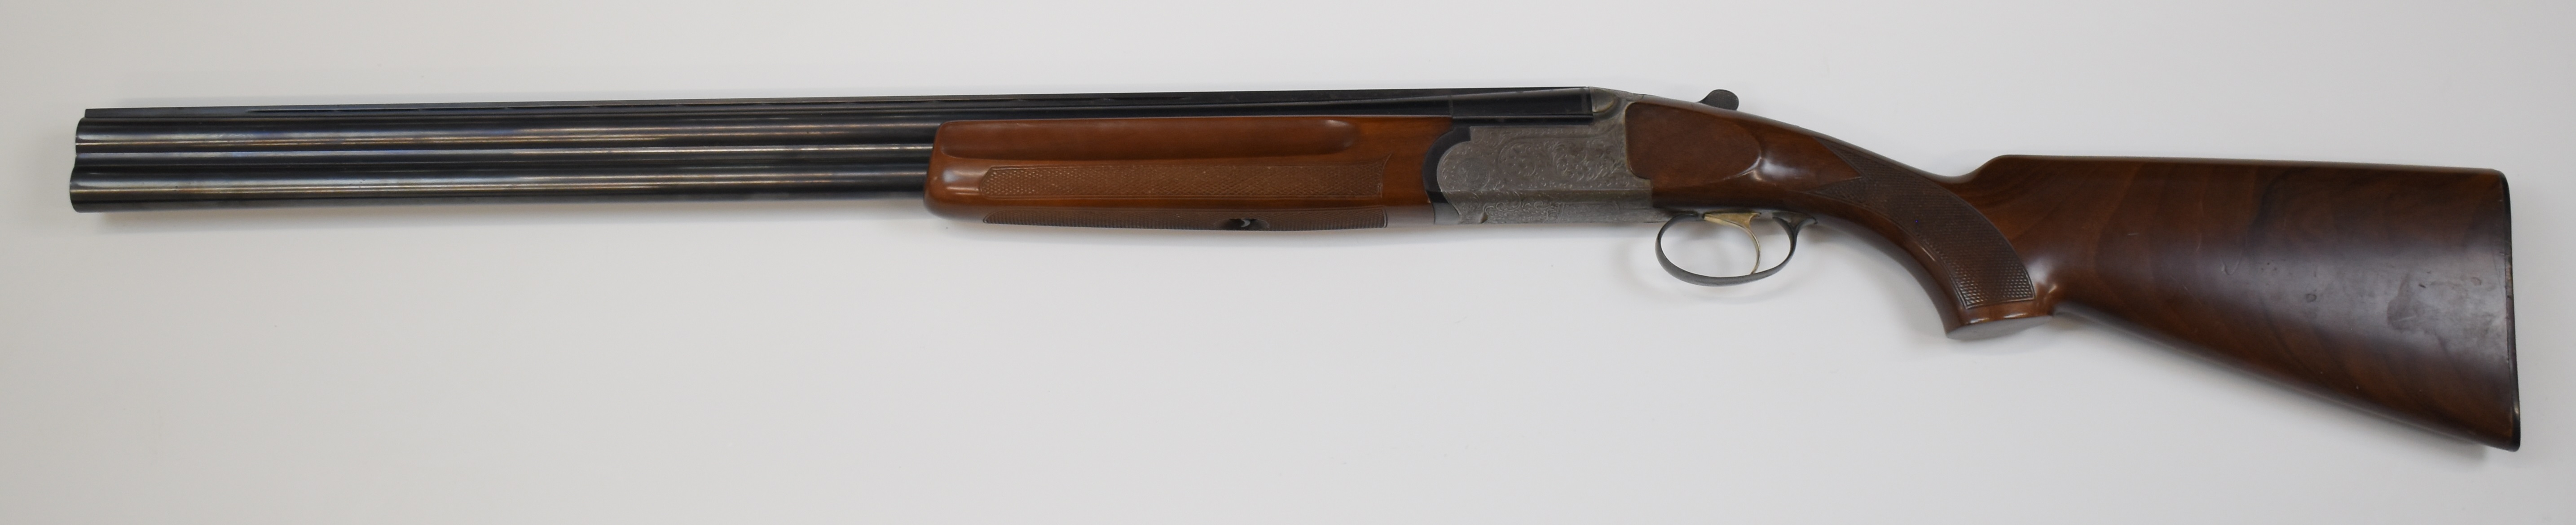 Sabatti 12 bore over under ejector shotgun with engraved lock, underside, top plate, trigger guard - Image 7 of 10